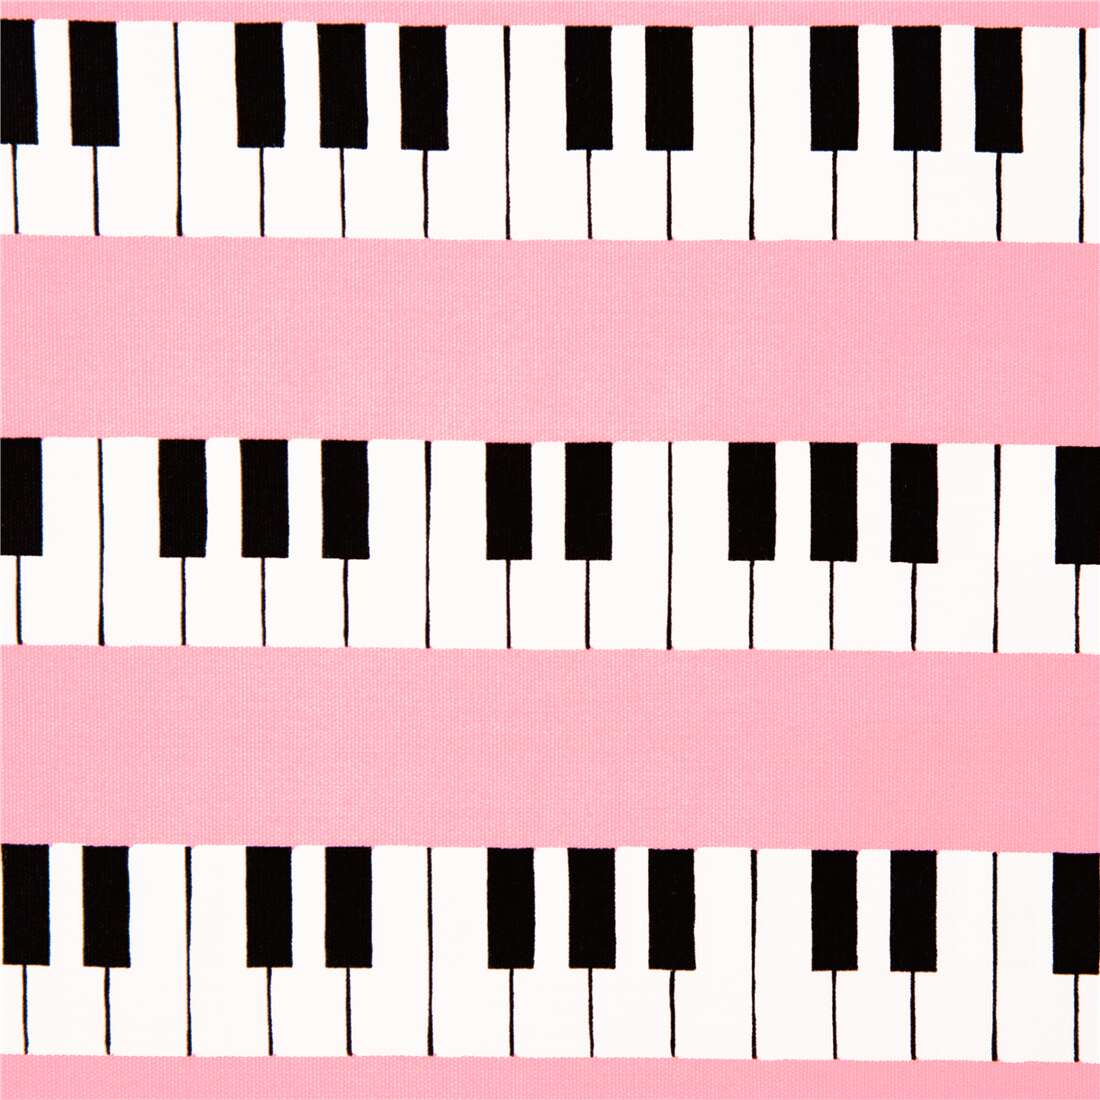 Demon Play dispersión esférico Remnant (36 x 112 cm) - Japan pink cotton oxford by Cosmo keyboard rows of  black and white piano key - modeS4u